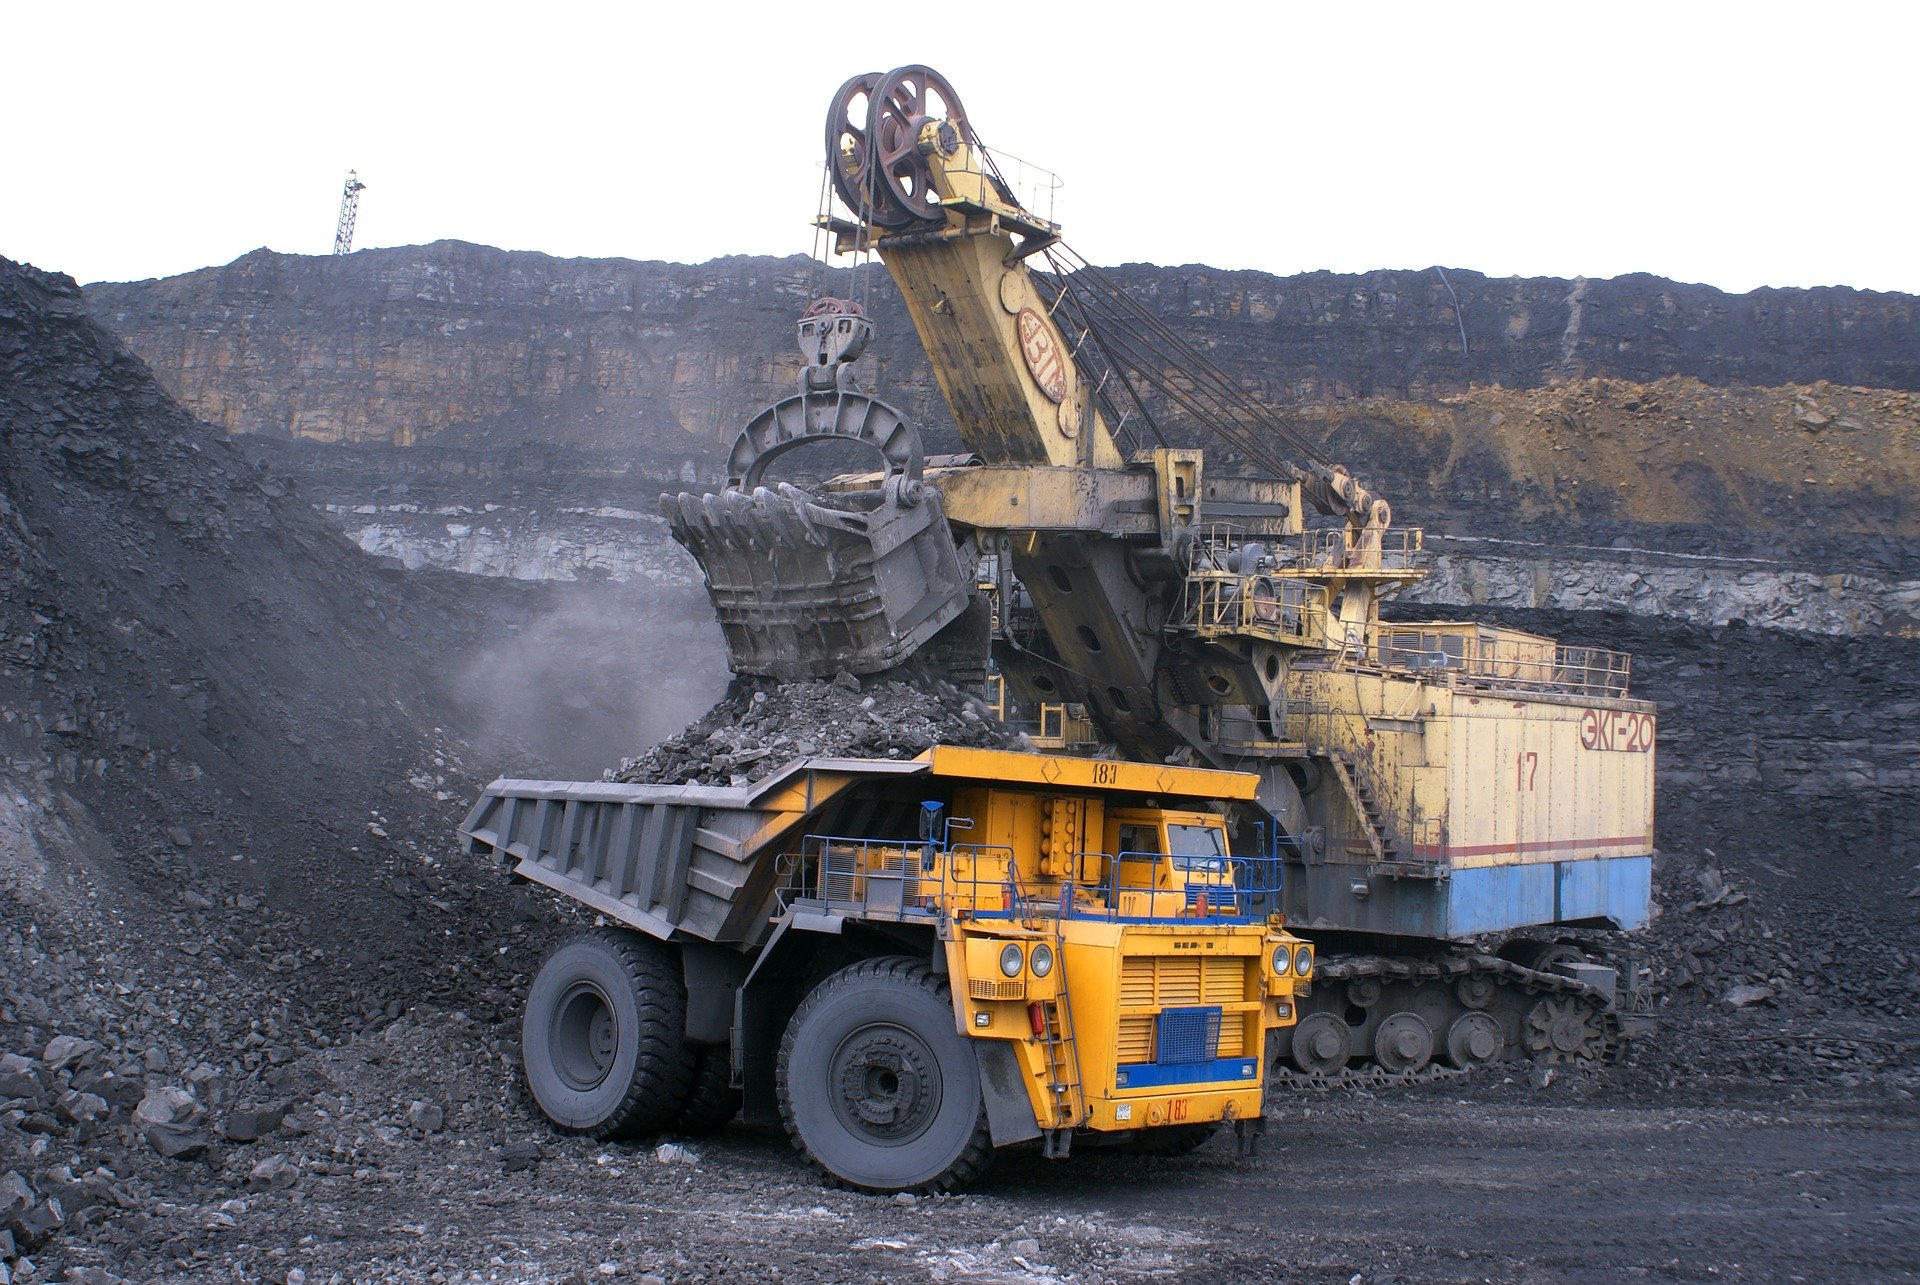 Indonesia uses 132 million tons of coal in 2020